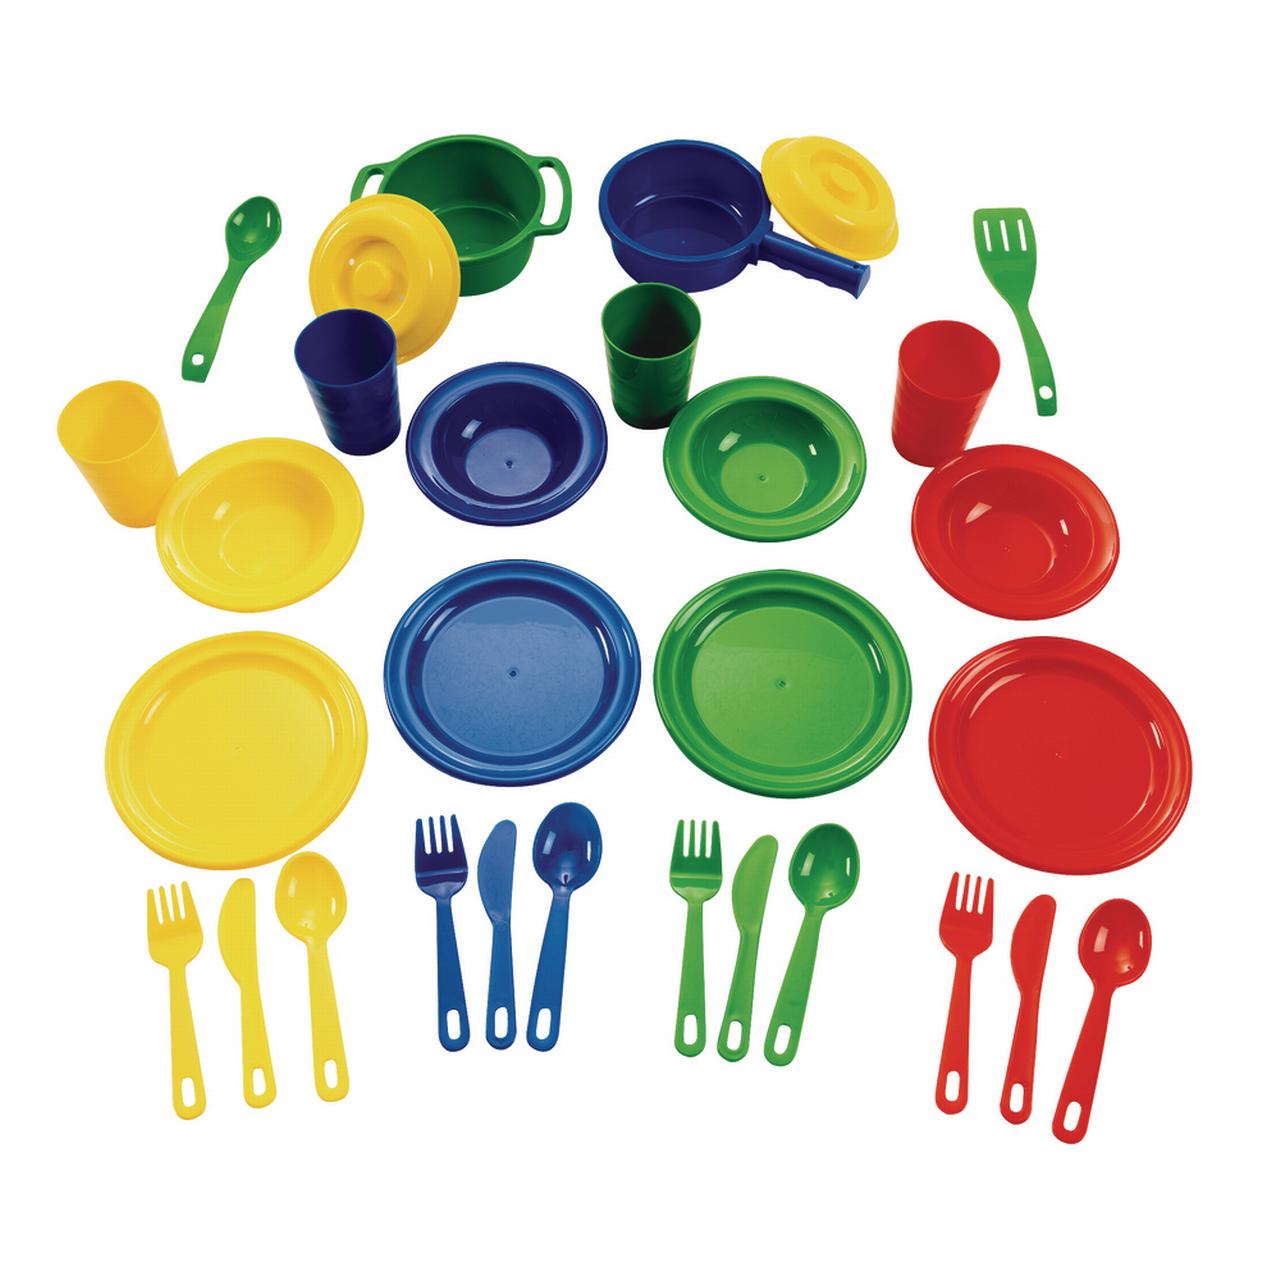 Excellerations Primary Toddler Dish Set - 30 Pieces - image 1 of 2